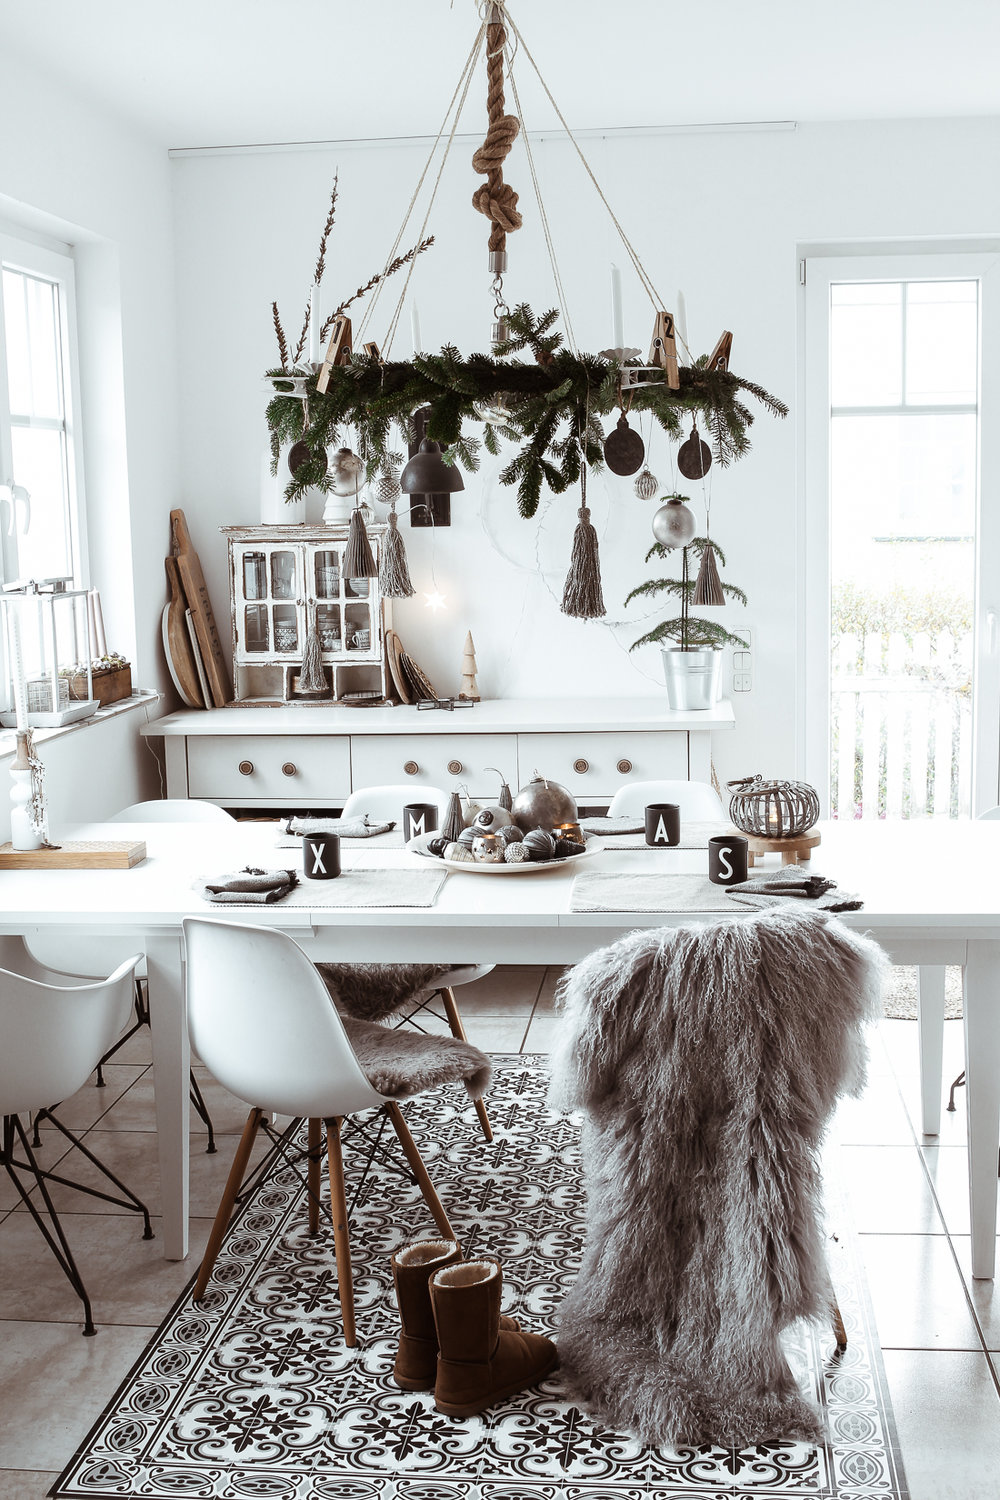 Visit This Warm, Natural Boho German Home For The Holidays